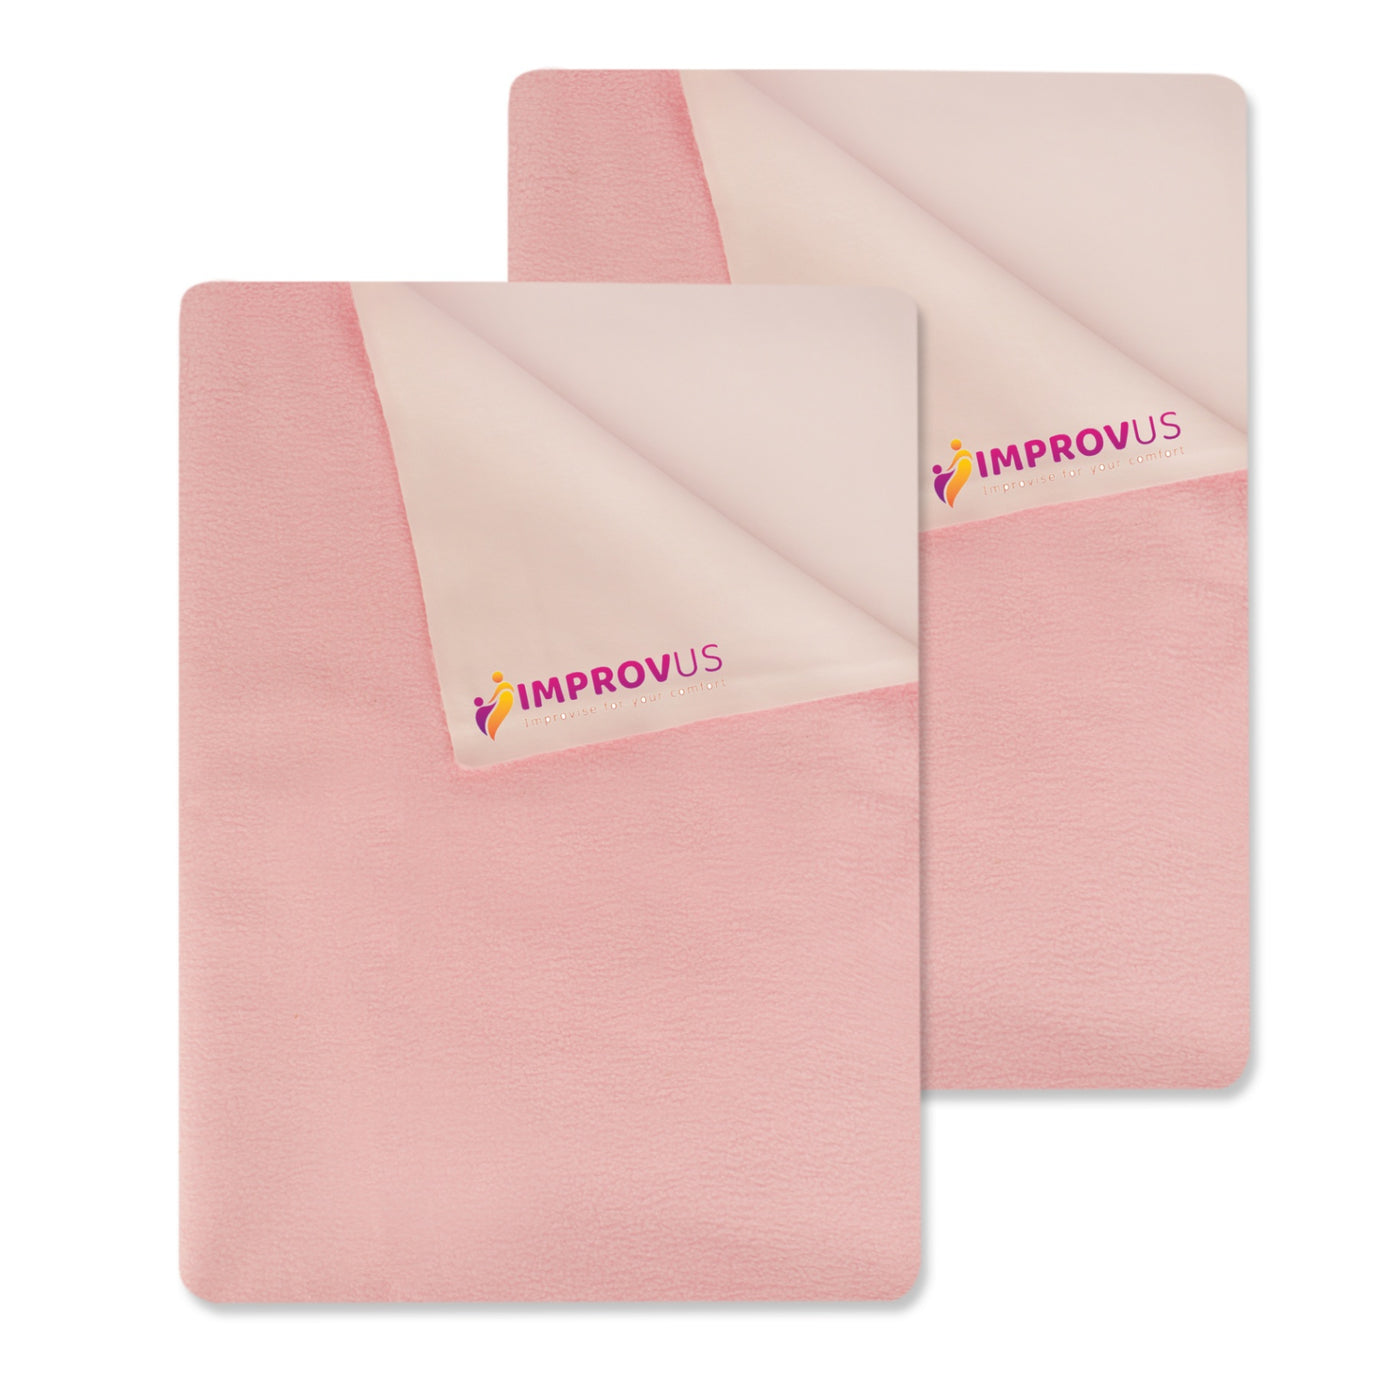 Improvus Bed Protector Washable, Resuable Baby Pink Mattress Protector  Baby Dry Sheet Pack Of 2